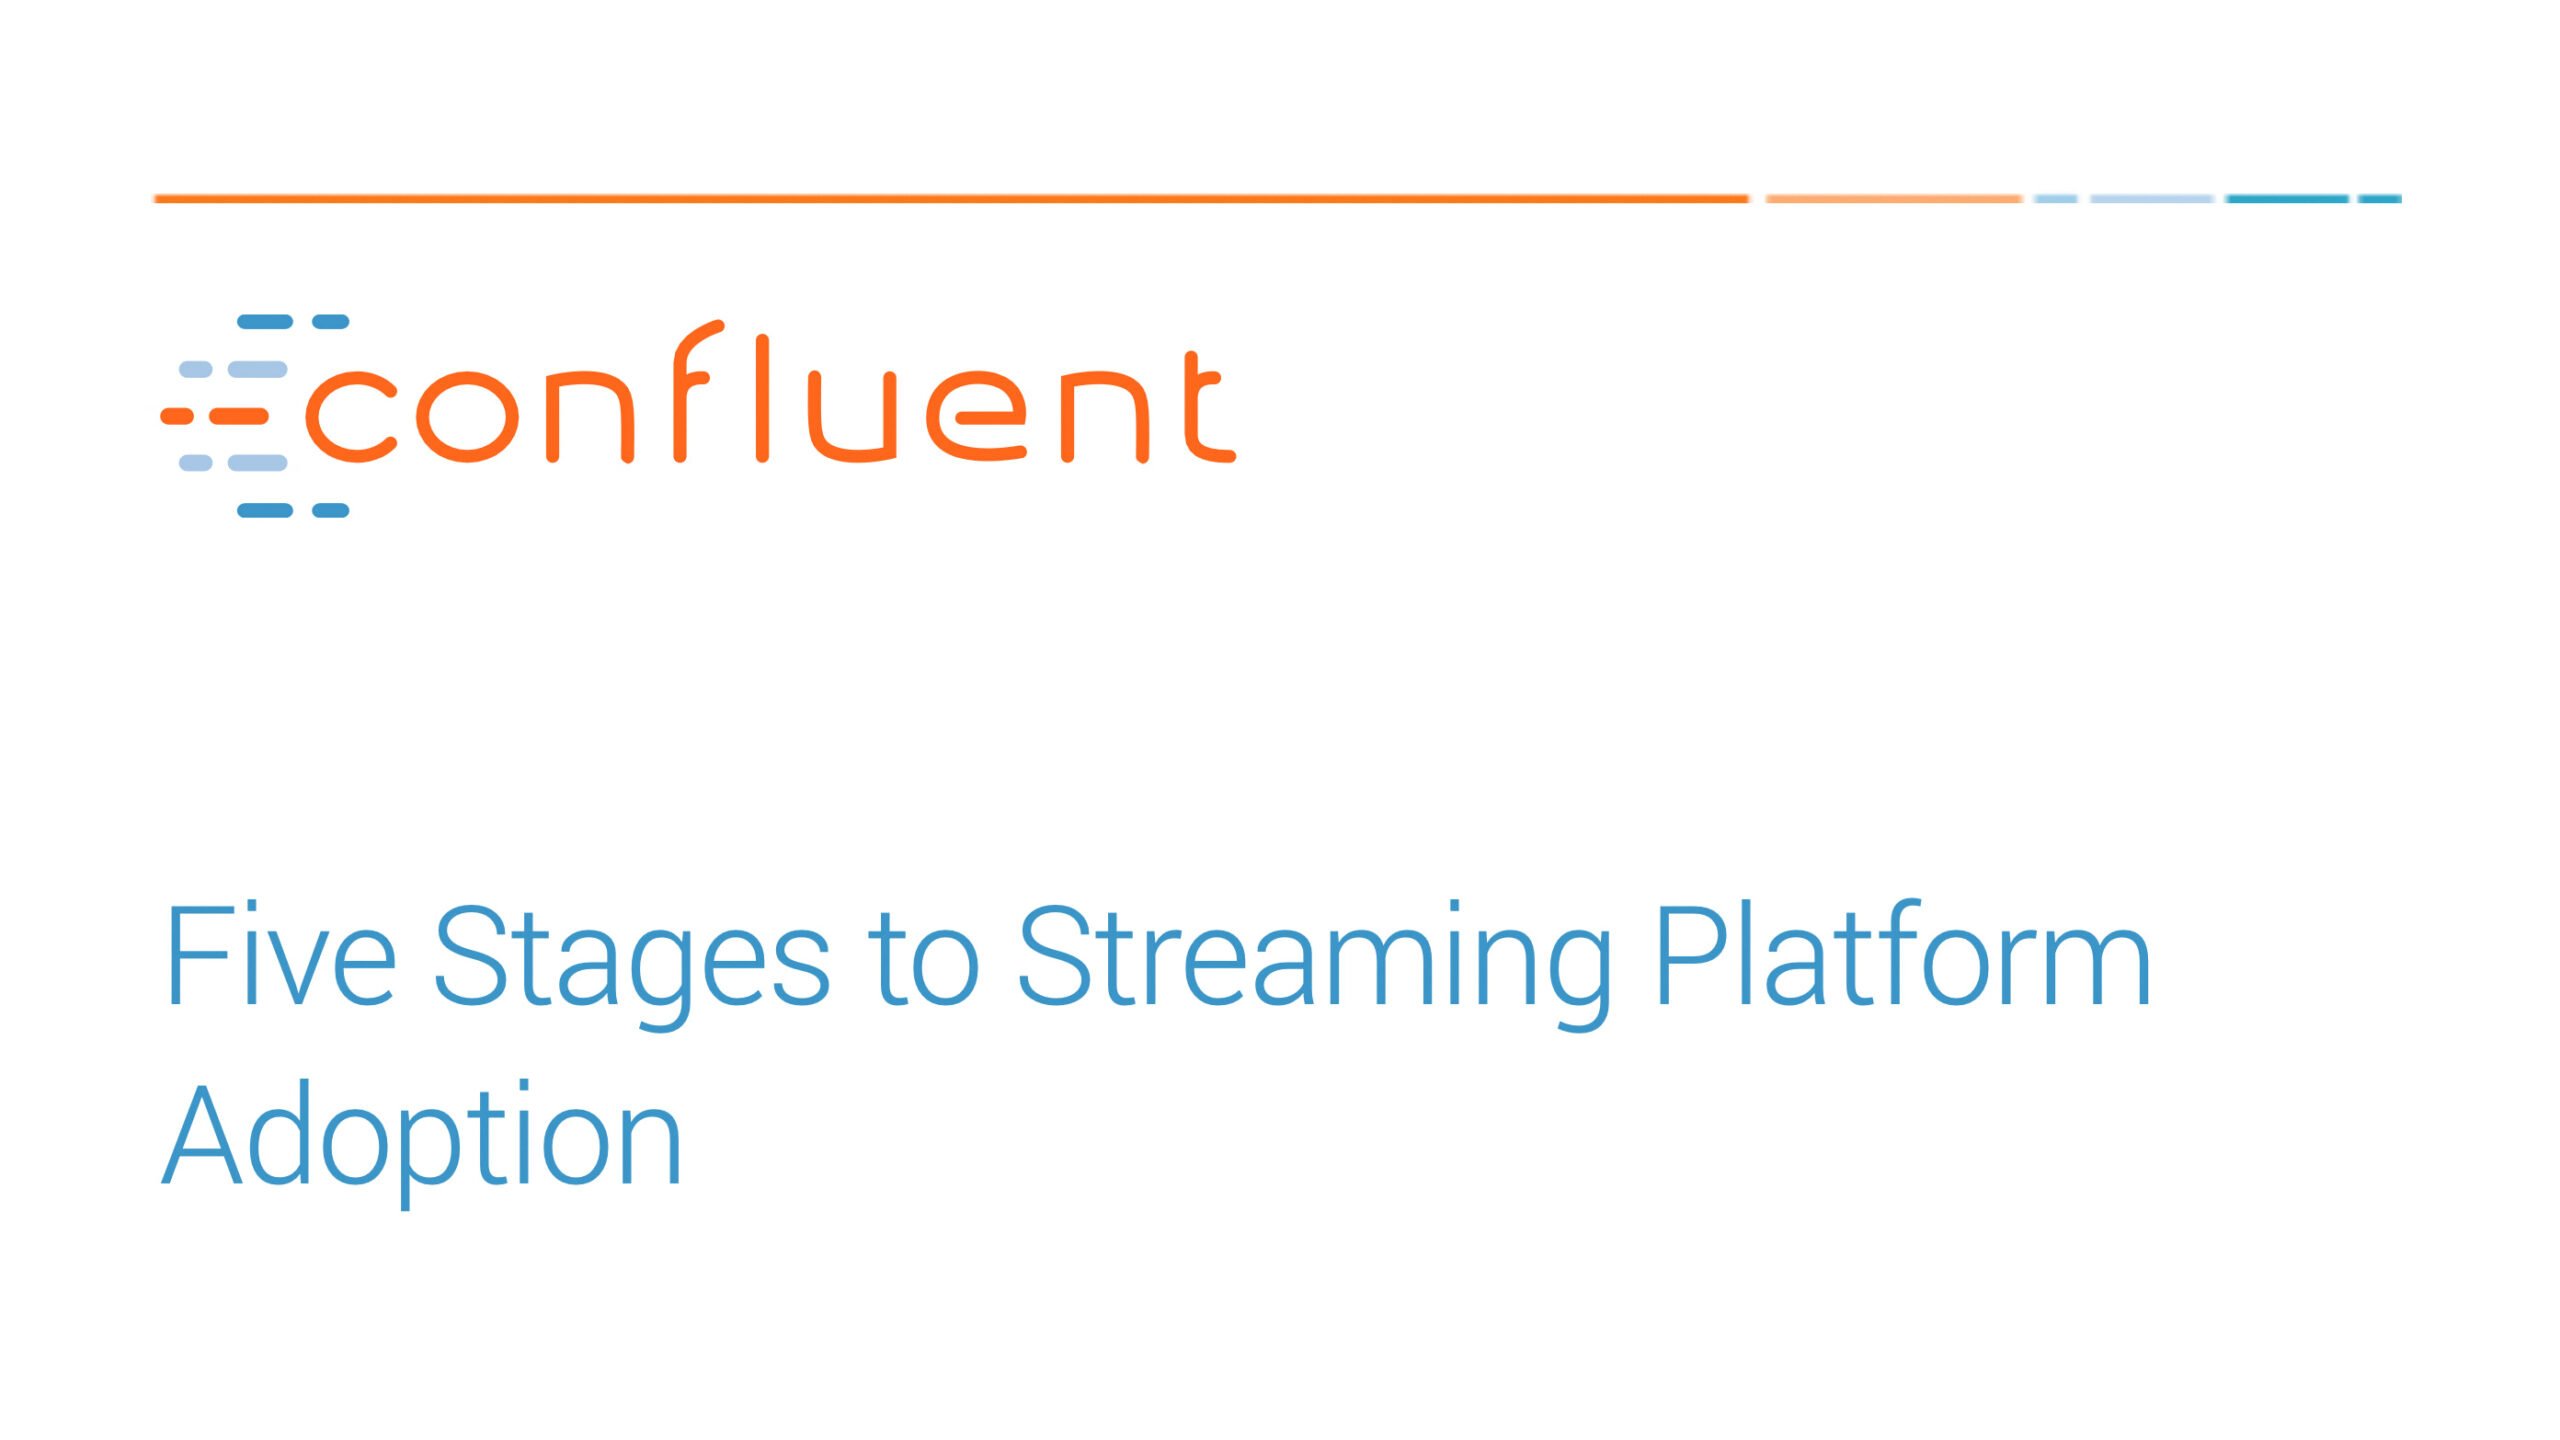 Five Stages to Streaming Platform Adoption